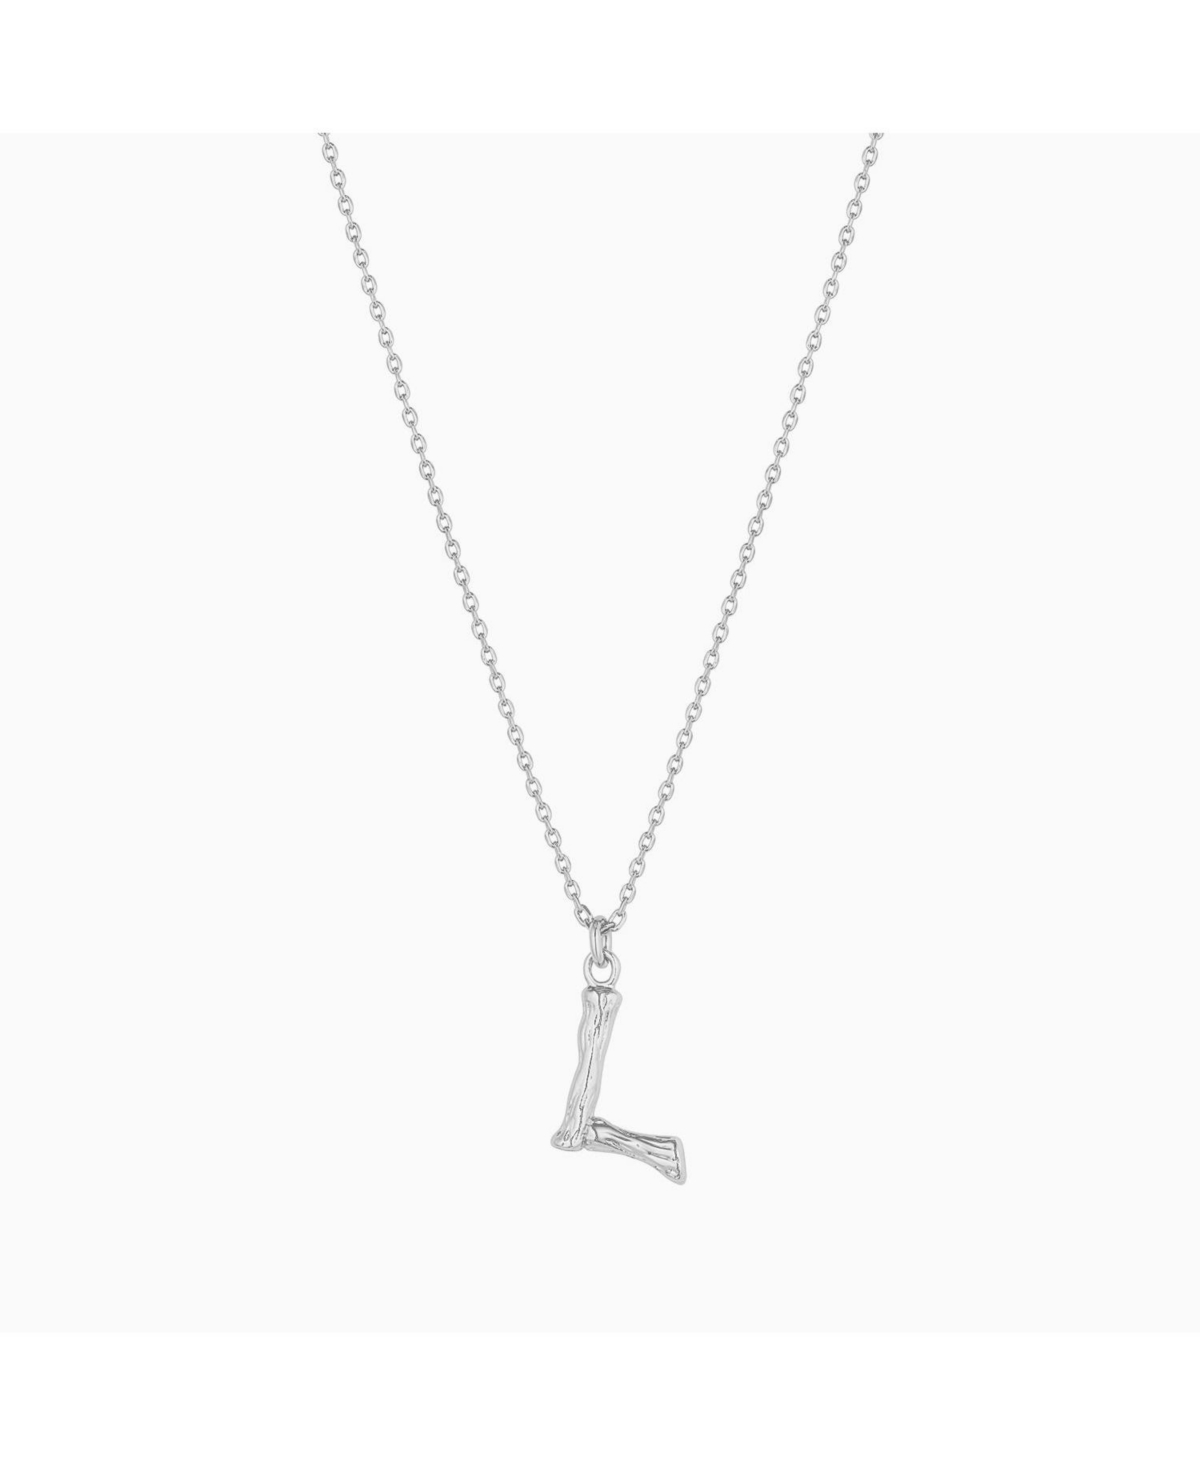 Textured Initial Letter Necklace - Silver - v